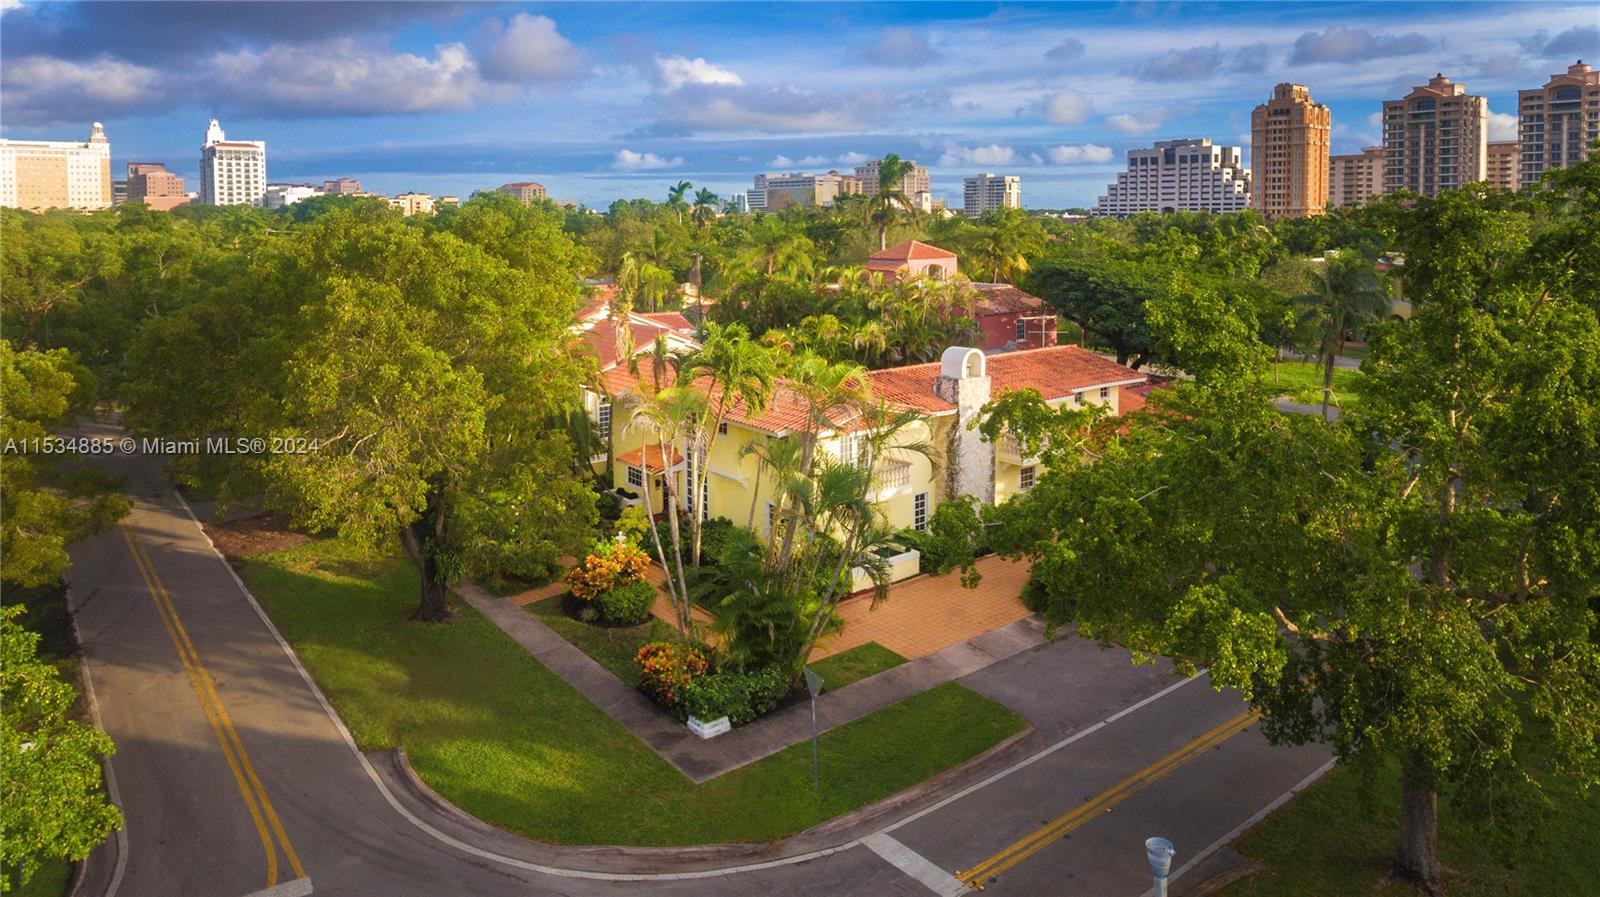 If you are looking for a great location in Coral Gables it does not get much better than this. Two Level, 4-Bedrooms, 3.5-Baths, 2 car garage, on a large corner lot just one block from the Granada golf course. Updated kitchen, large pool, fireplace, and a lot of light. Perfect for entertaining, and just minutes away from downtown Coral Gables and great dining. Pool guest suite, soaring 20ft ceilings, walk in closets, marble baths, and multiple balconies. Great landscaping and surrounded by greenery. Beautiful and imposing, this is an excellent home.